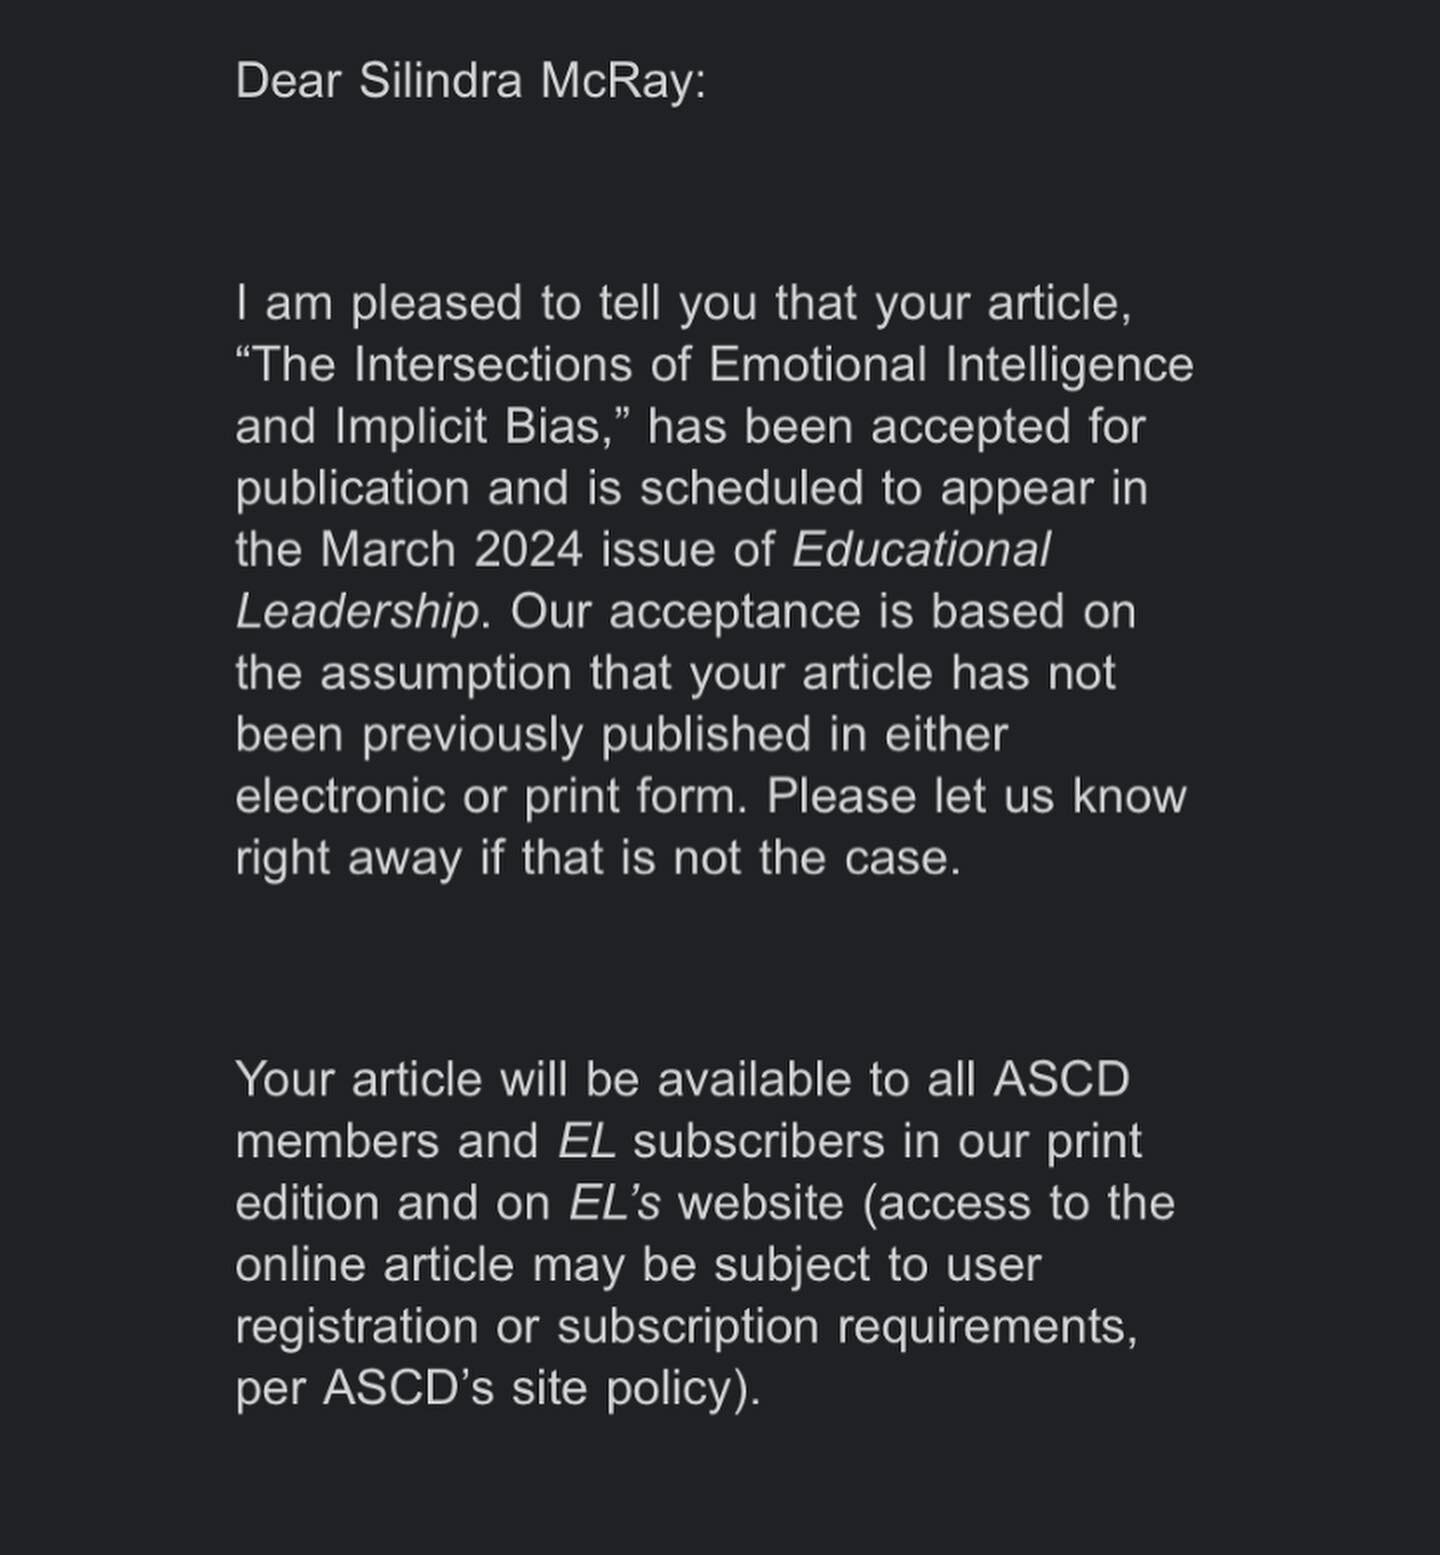 I am so excited! I submitted a research article that I wrote, titled, &ldquo;The Intersections of Emotional Intelligence and Implicit Bias,&rdquo; and it has been accepted for publication and is scheduled to appear in the March 2024 issue of Educatio